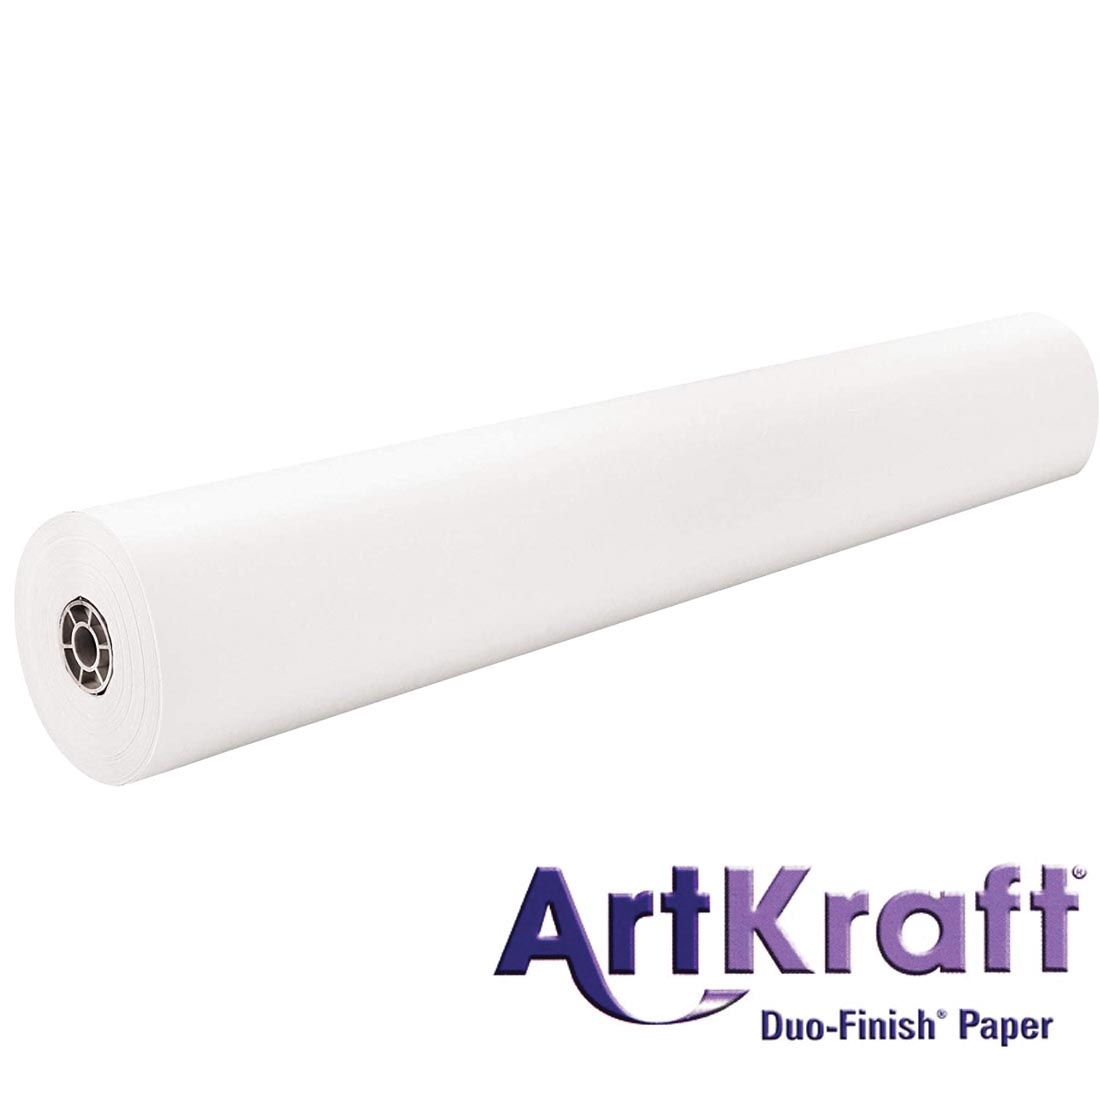 Roll of White Paper with text ArtKraft Duo-Finish Paper